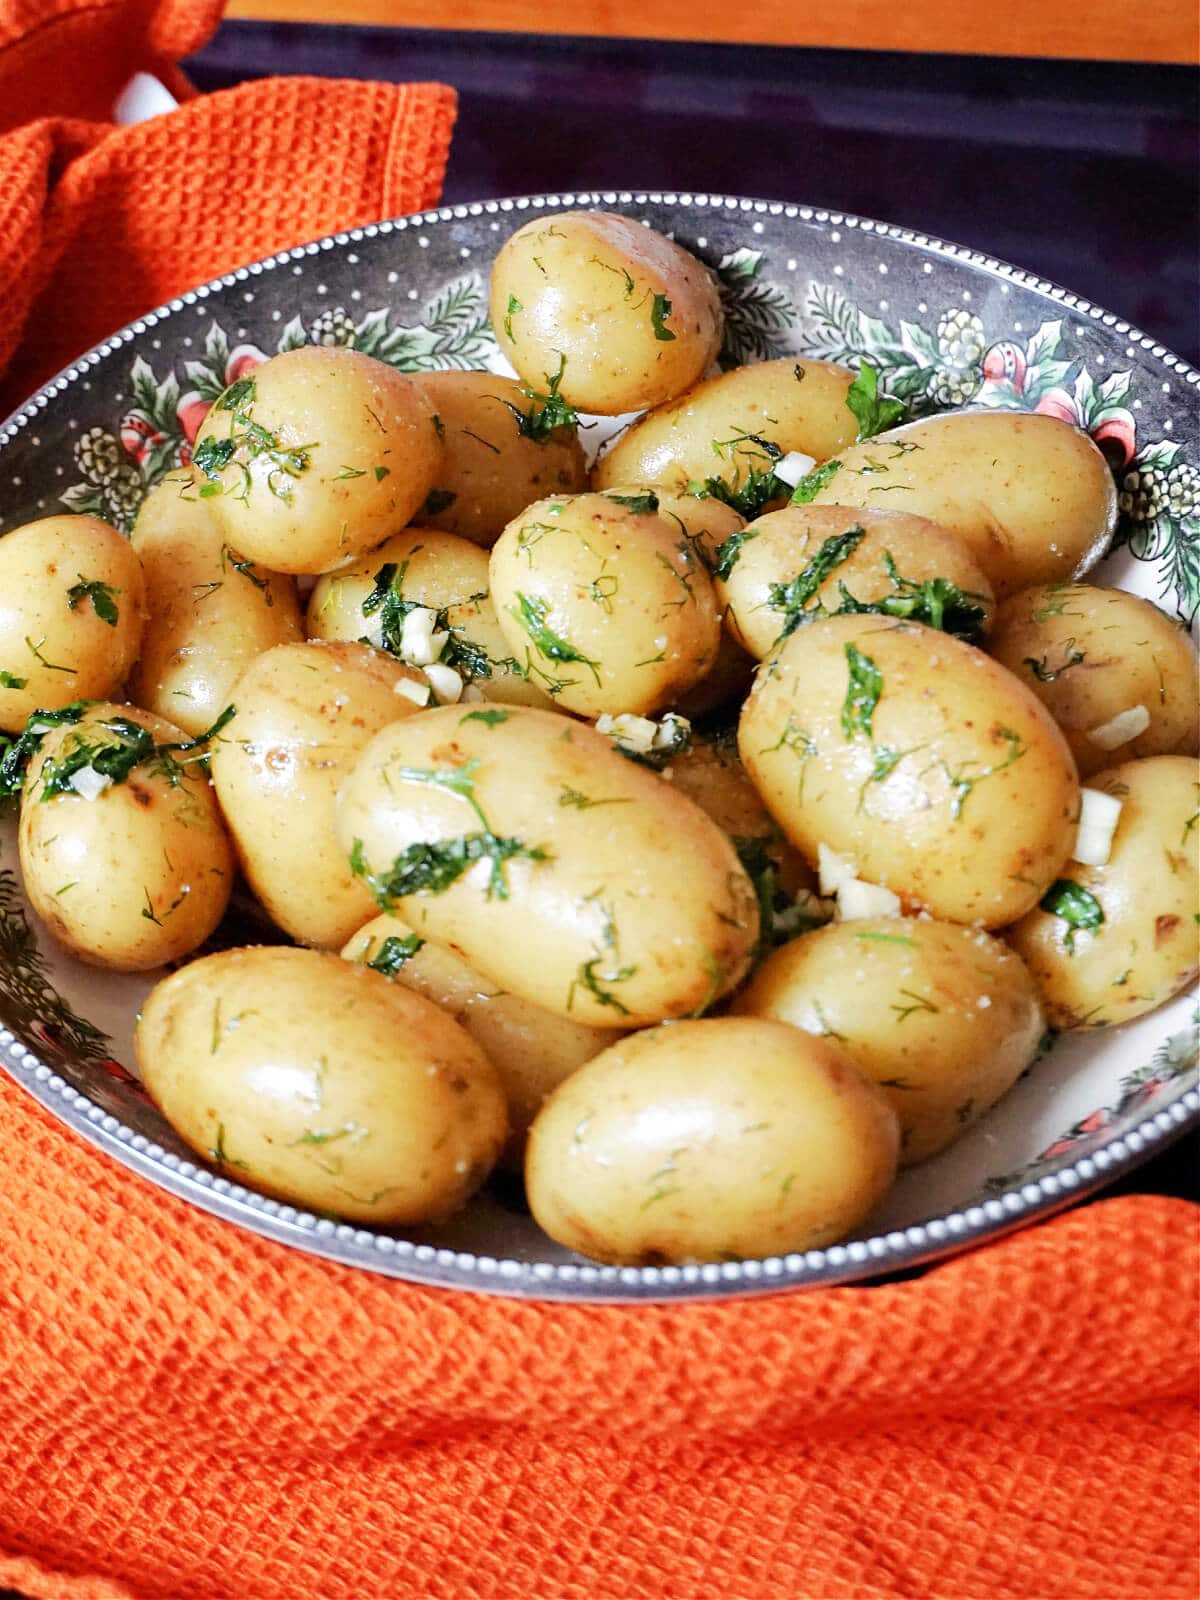 A bowl with boiled baby potatoes with garlic and herbs.